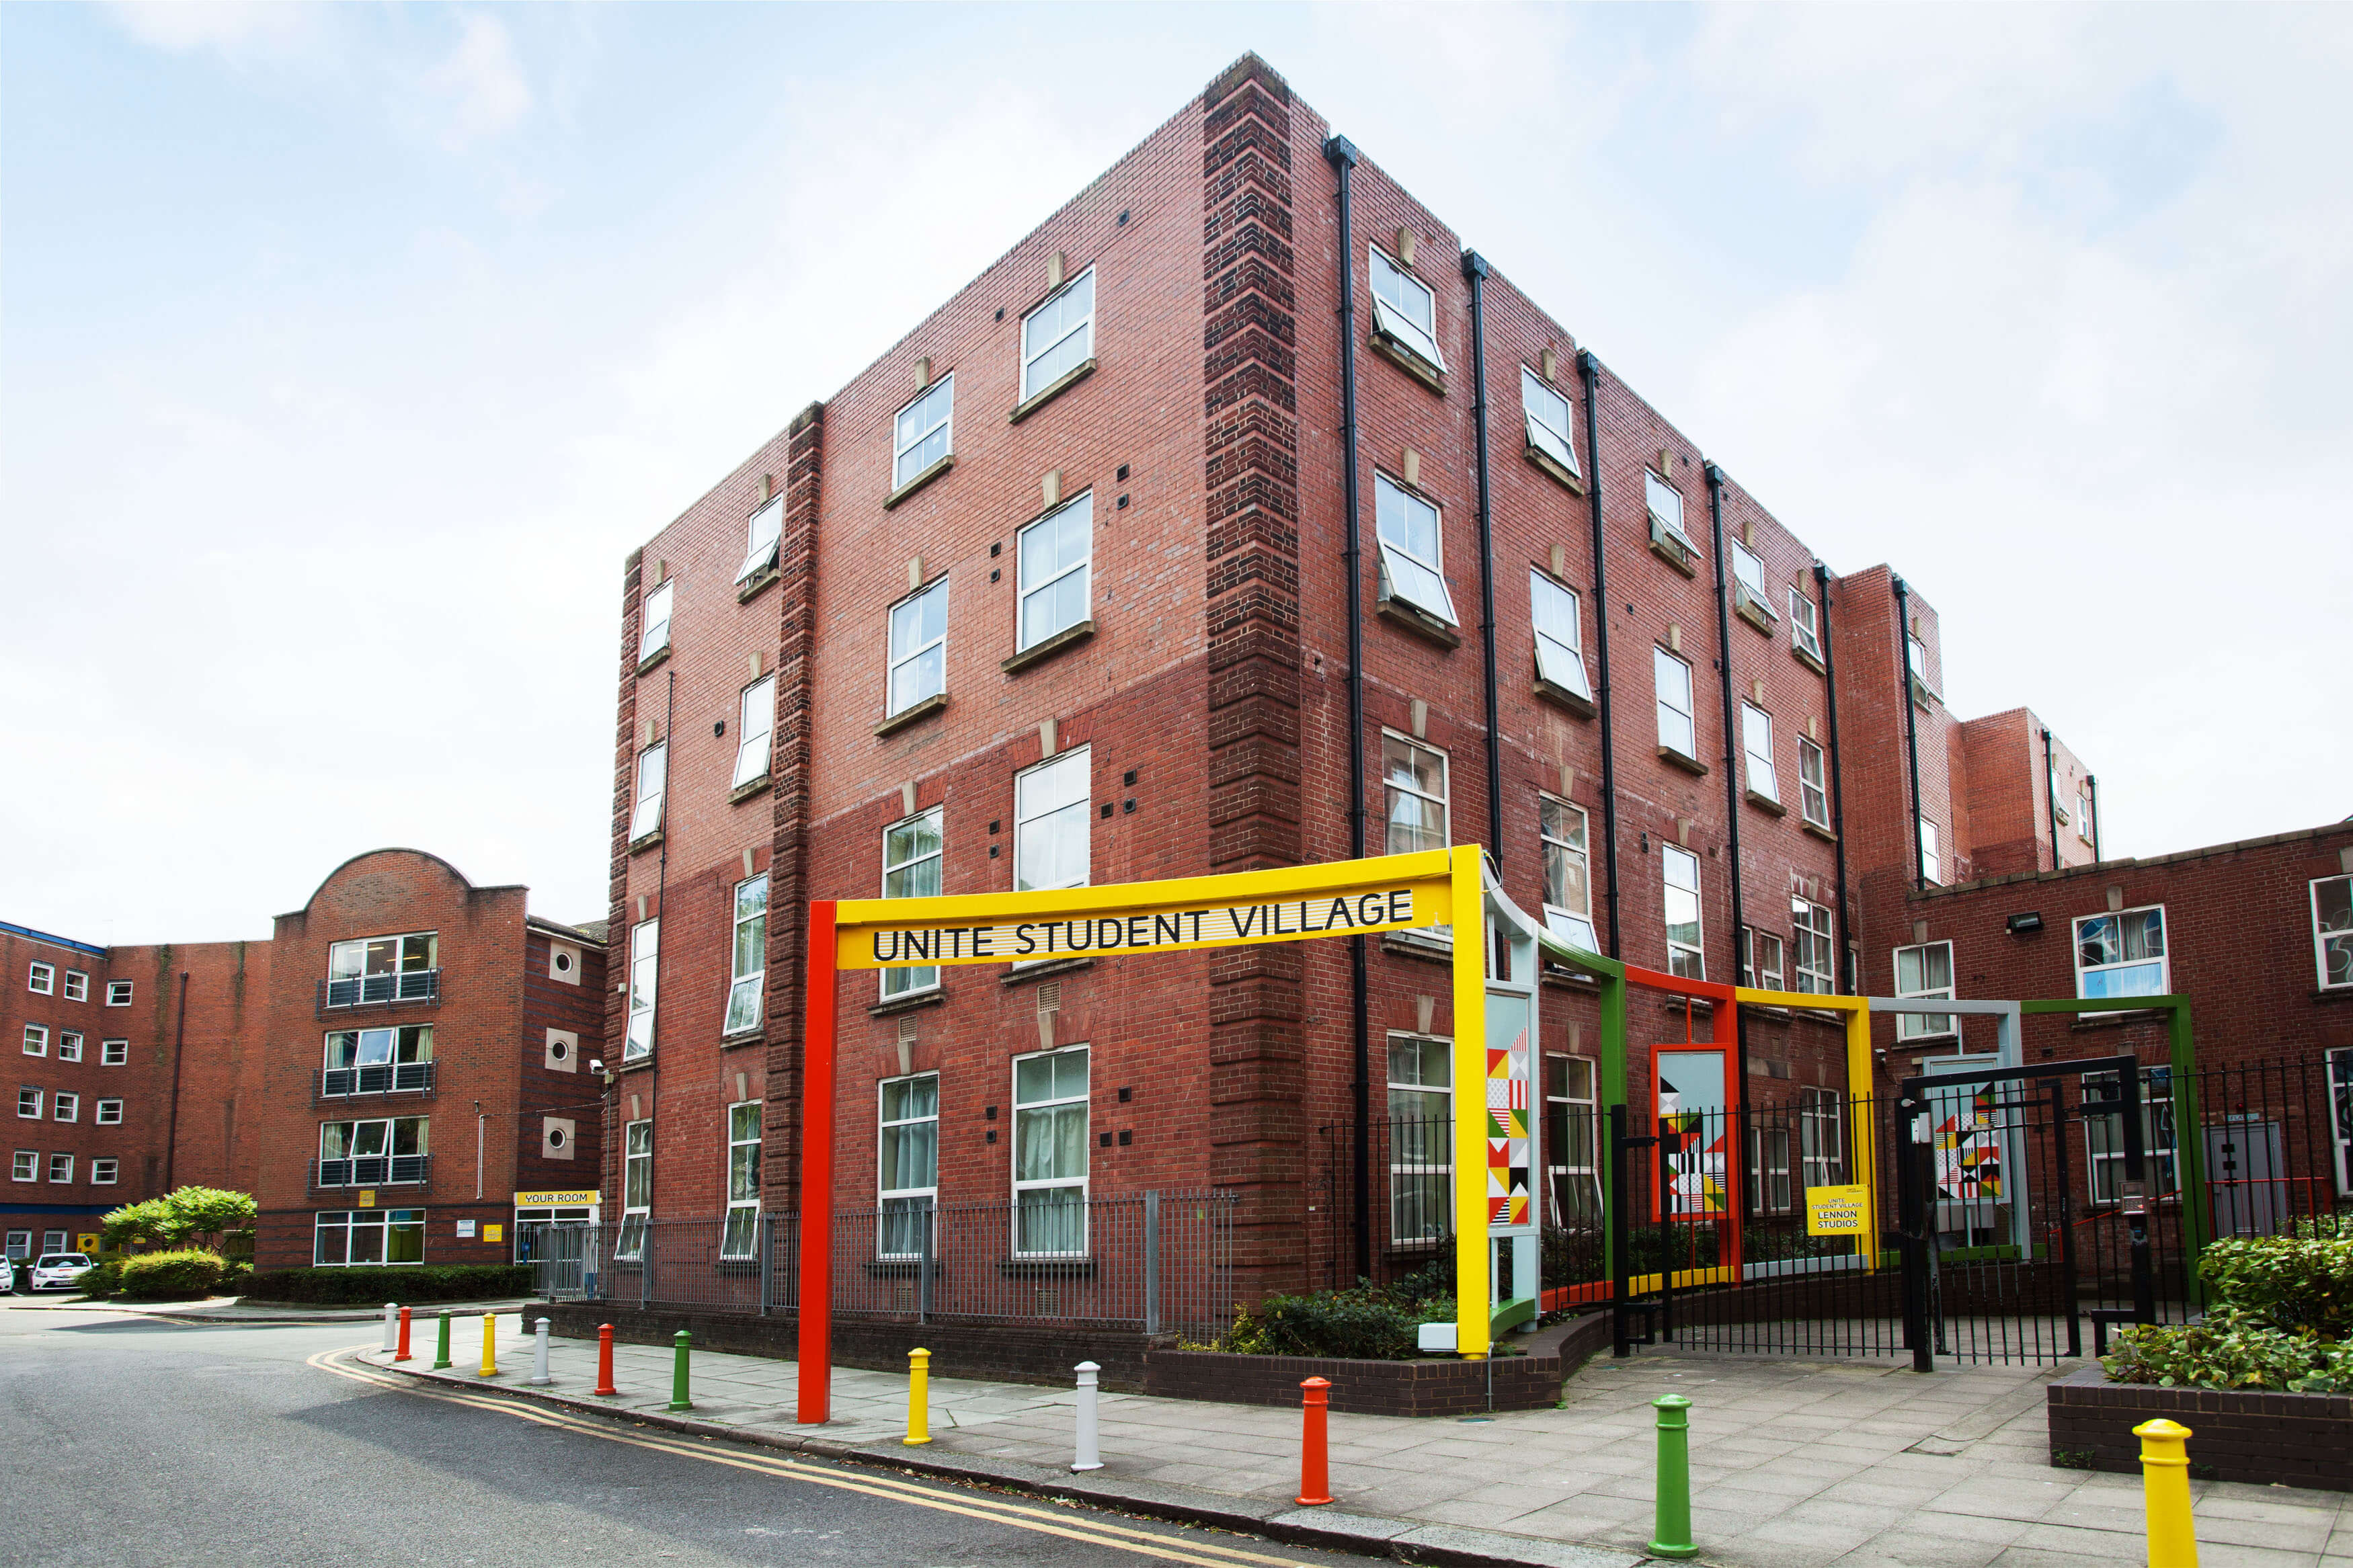 Unite Students accommodation at Lennon Studios in Liverpool